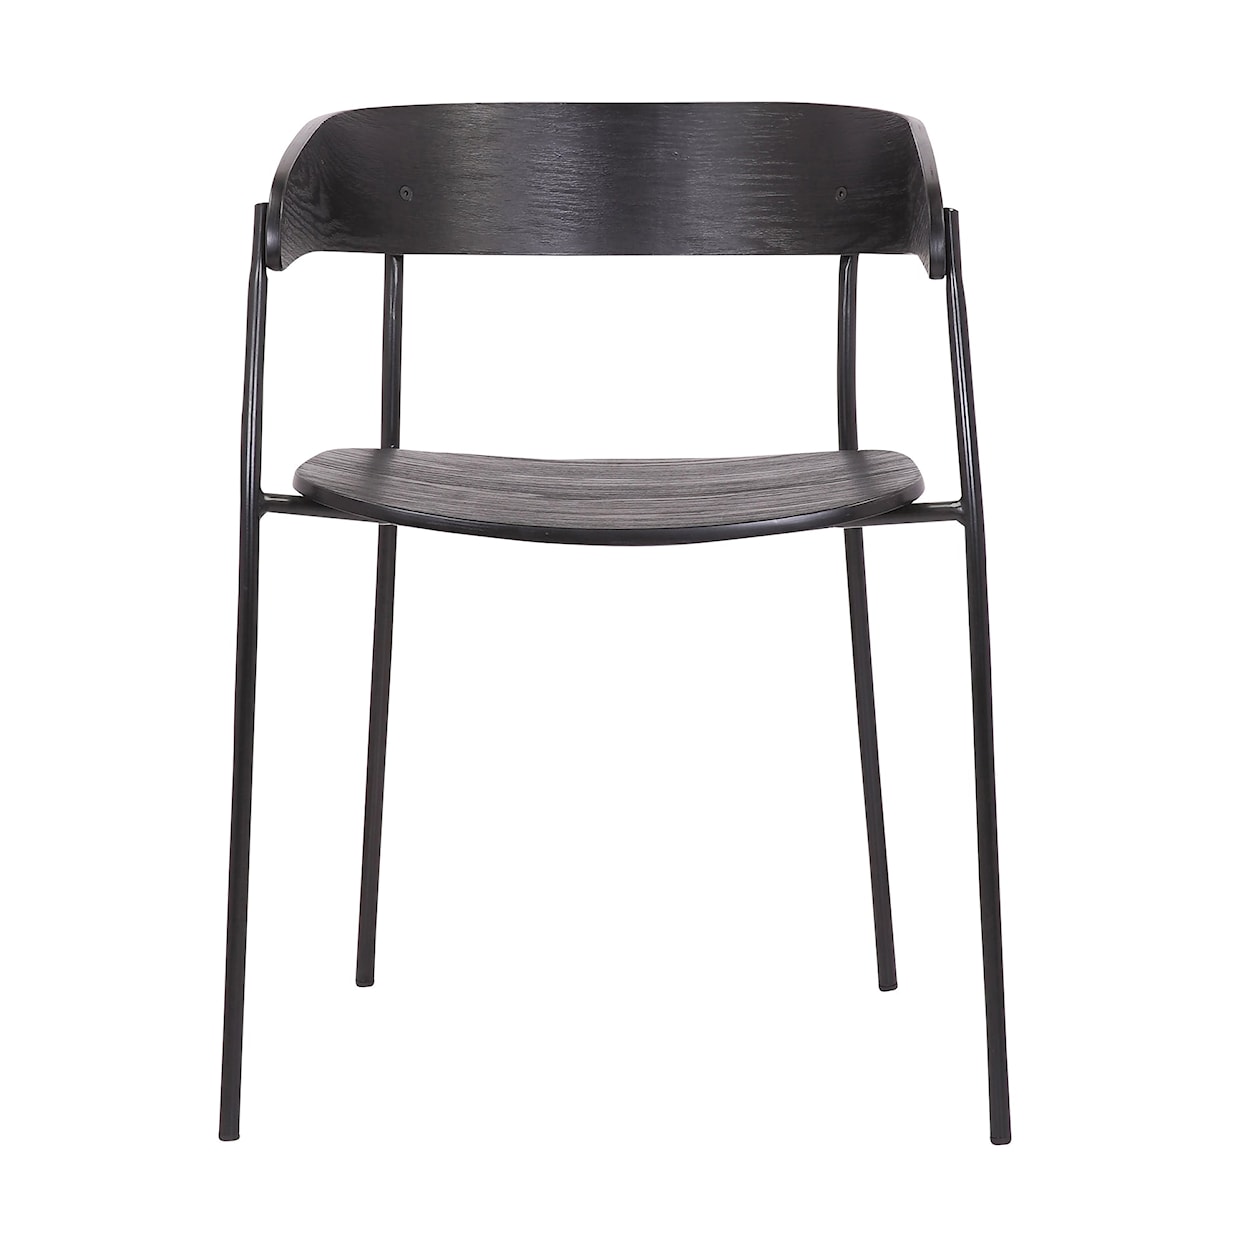 Armen Living Perry Wood and Metal Modern Dining Room Chairs 